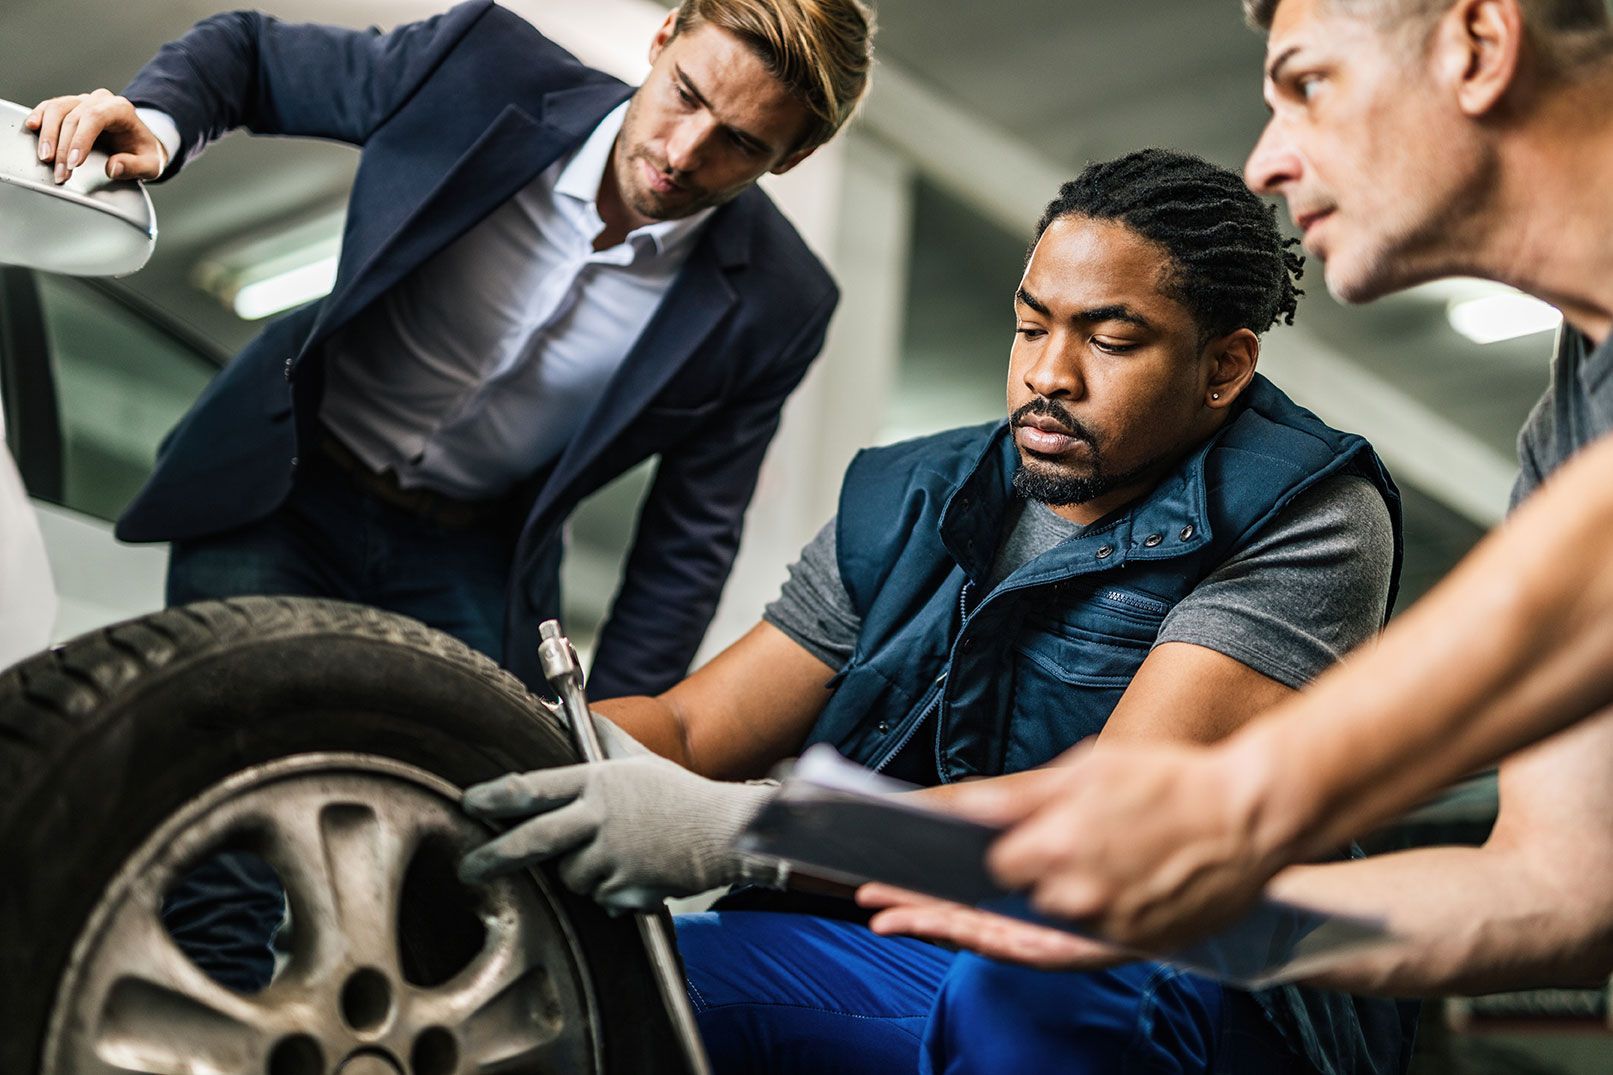 a group of men are working on a tire in a garage .